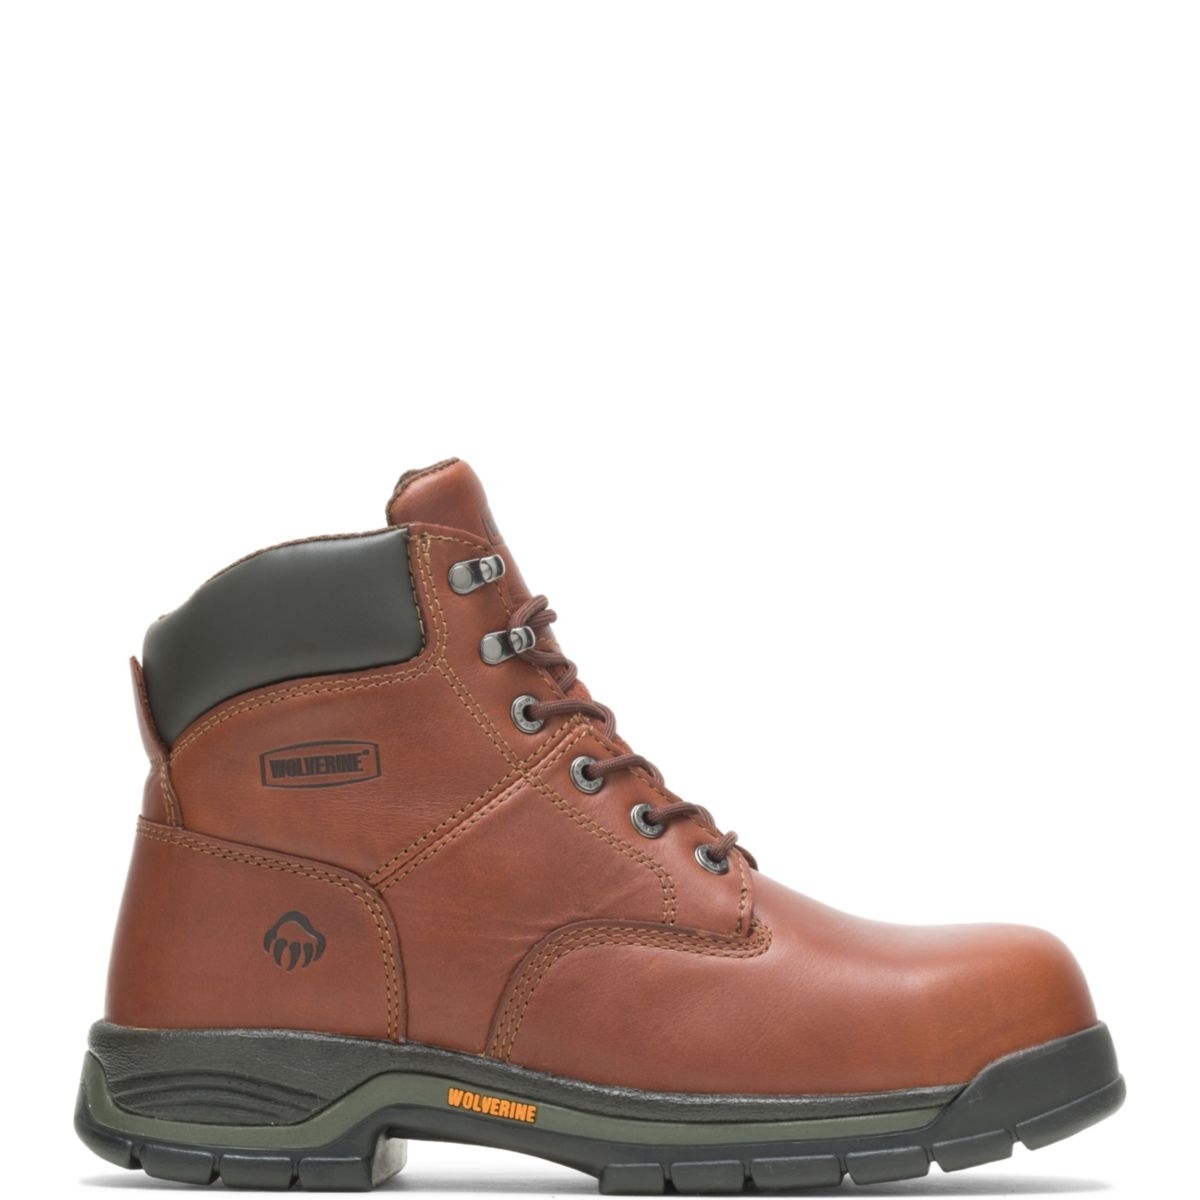 WOLVERINE Men's Harrison 6 Lace-Up SoftToe Work Boot Brown - W04906 Varies BROWN - BROWN, 15 X-Wide